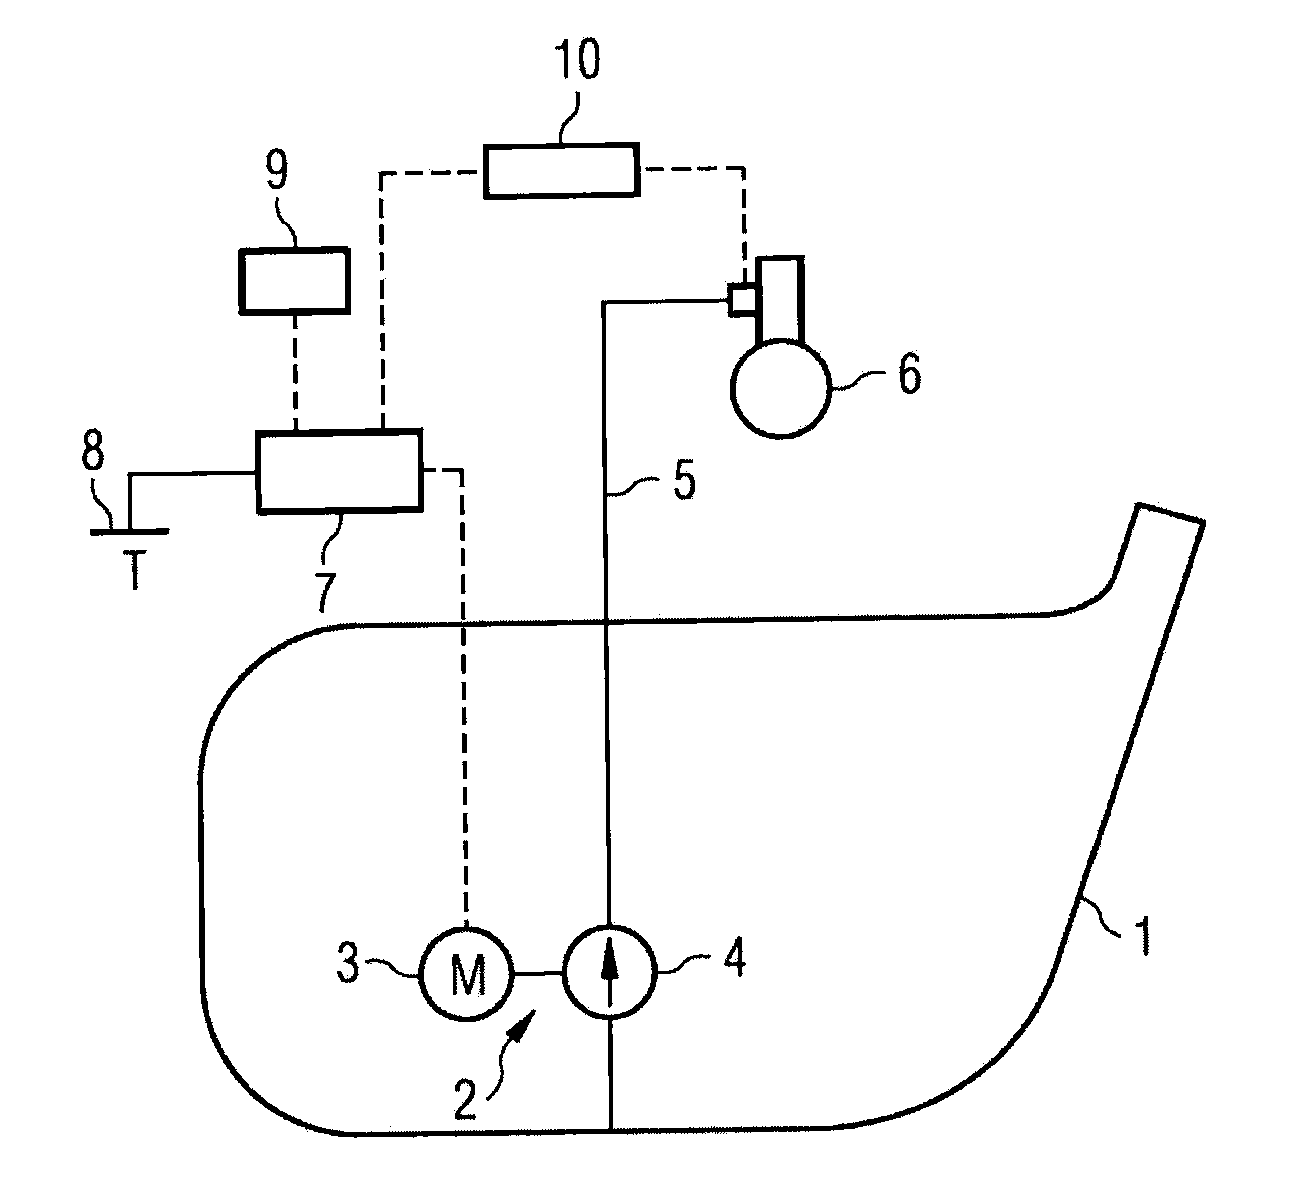 Method For Monitoring An Electromotively Driven Fuel Pump And Fuel Feed Unit Having A Fuel Pump